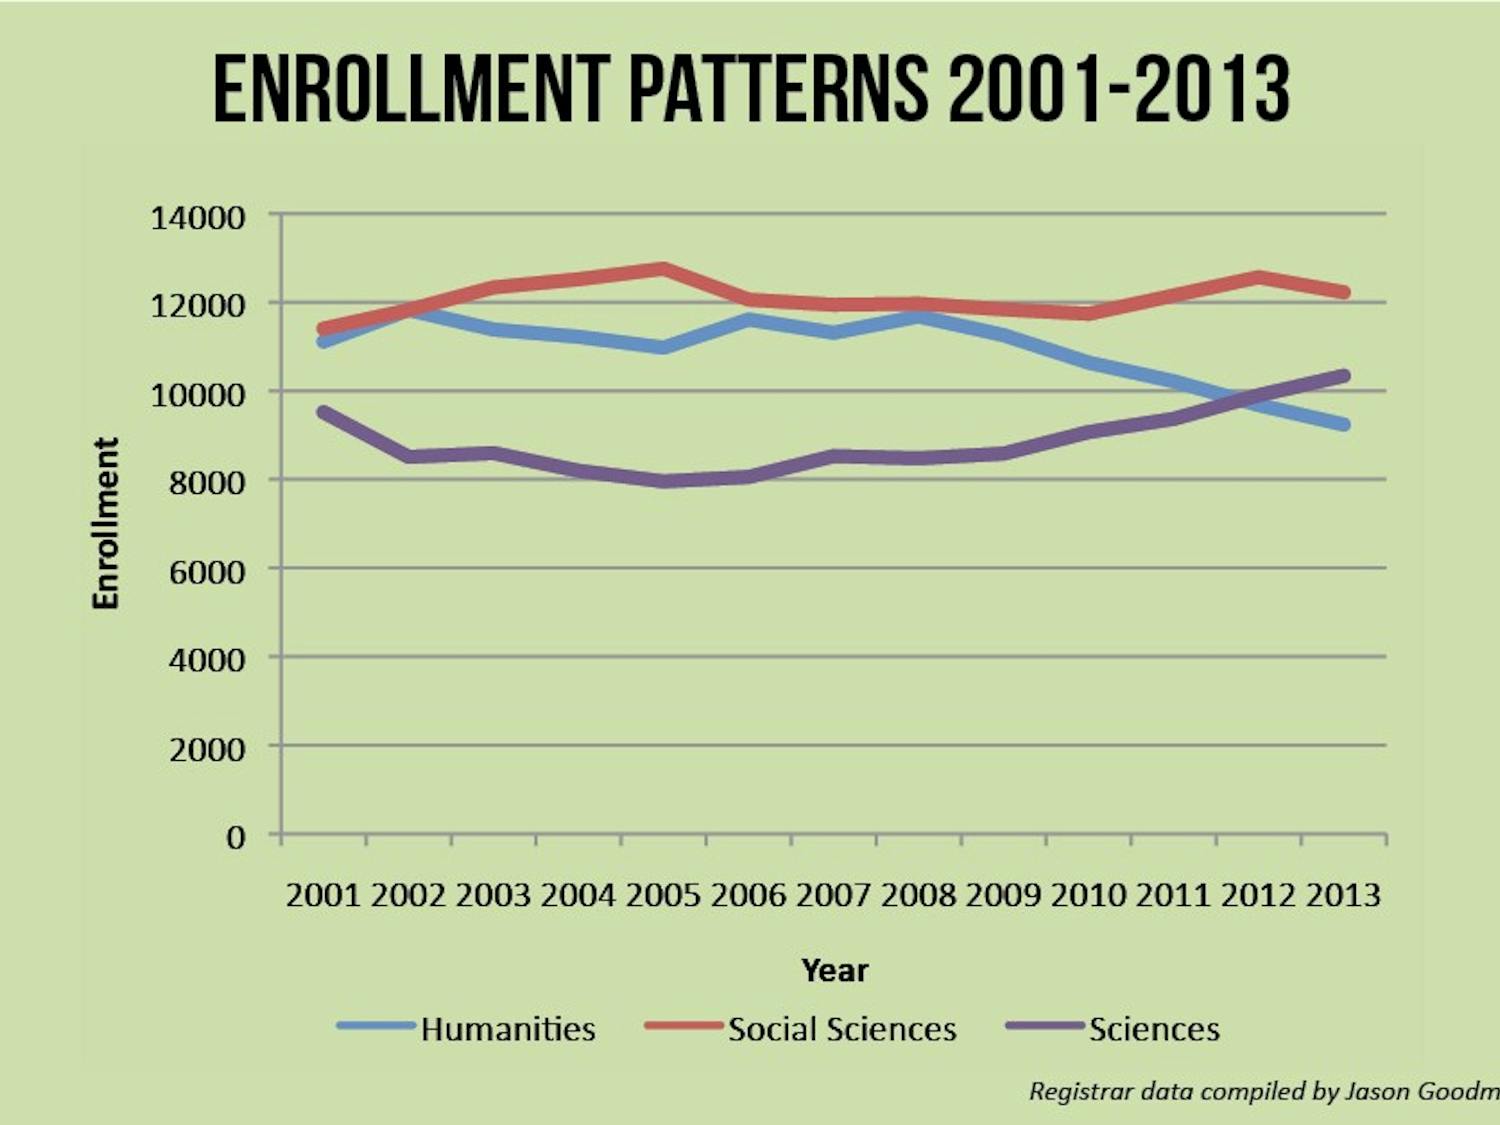 Data show declining interest in the humanities since 2008.